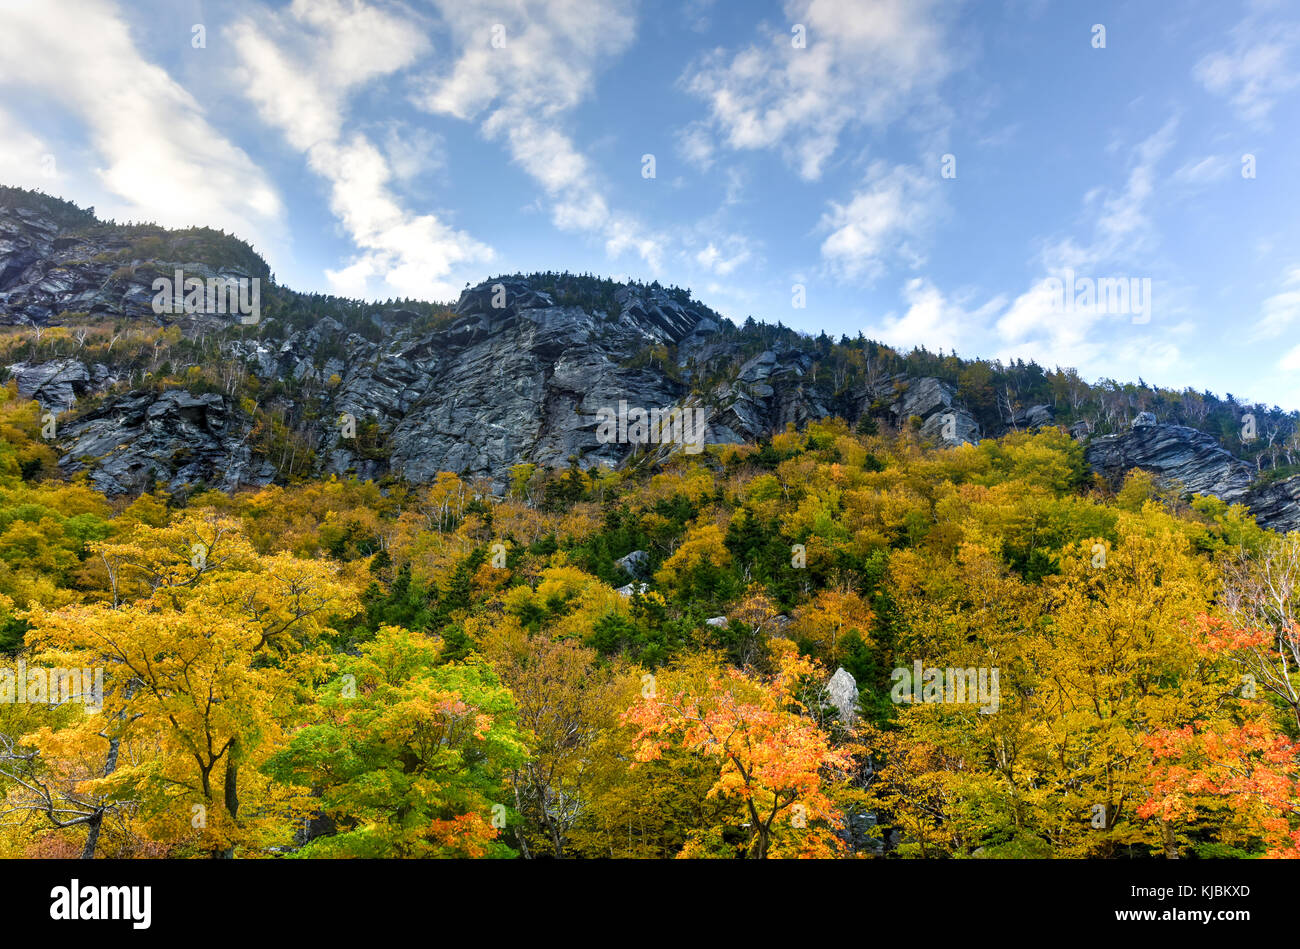 Peak fall foliage in Smugglers Notch, Vermont. Stock Photo